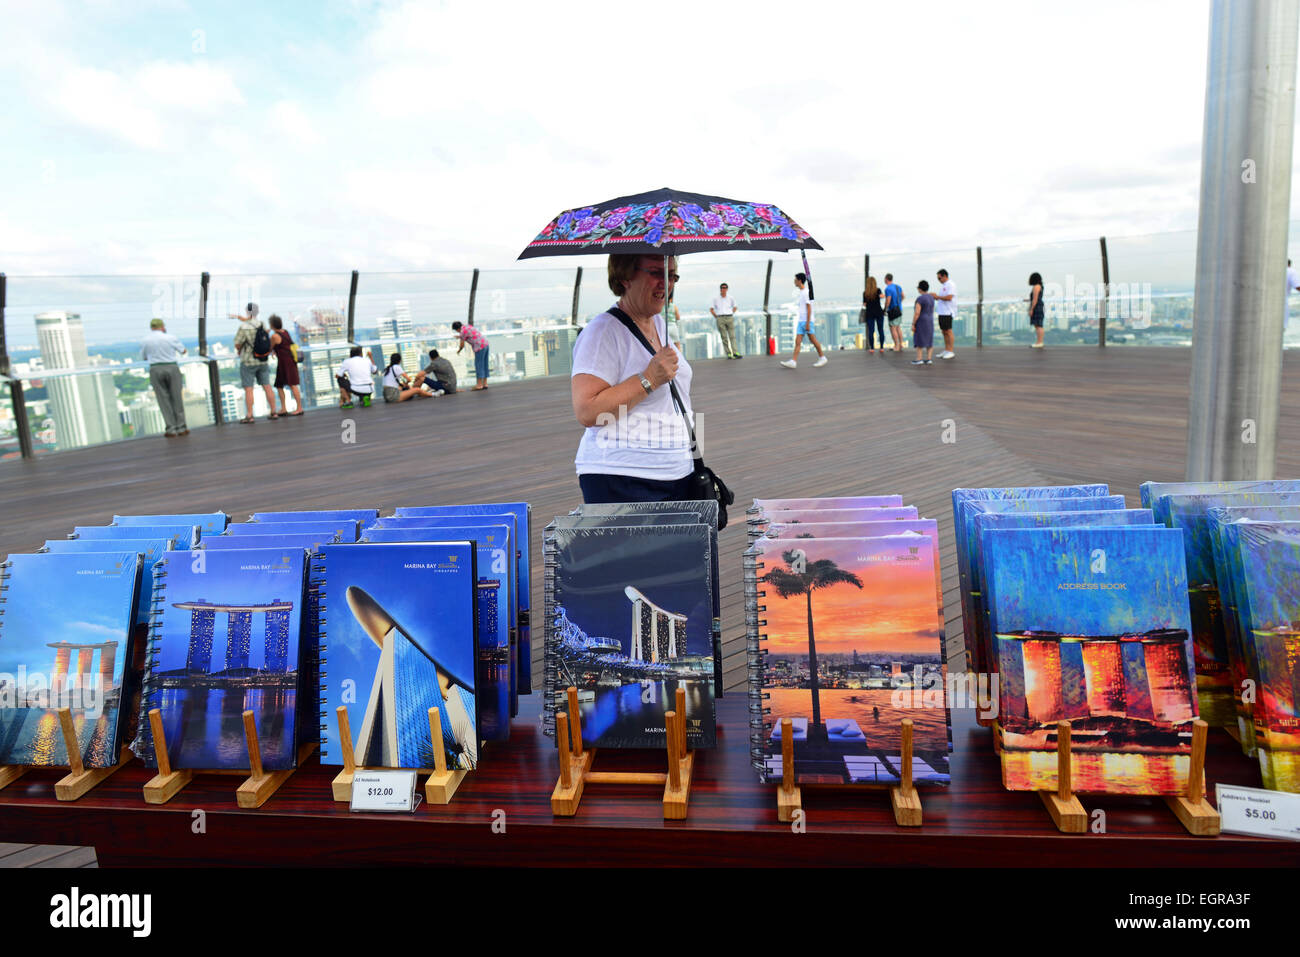 Souvenirs For Sale on the viewing platform of the Marine Bay Sands Hotel in Singapore. Stock Photo